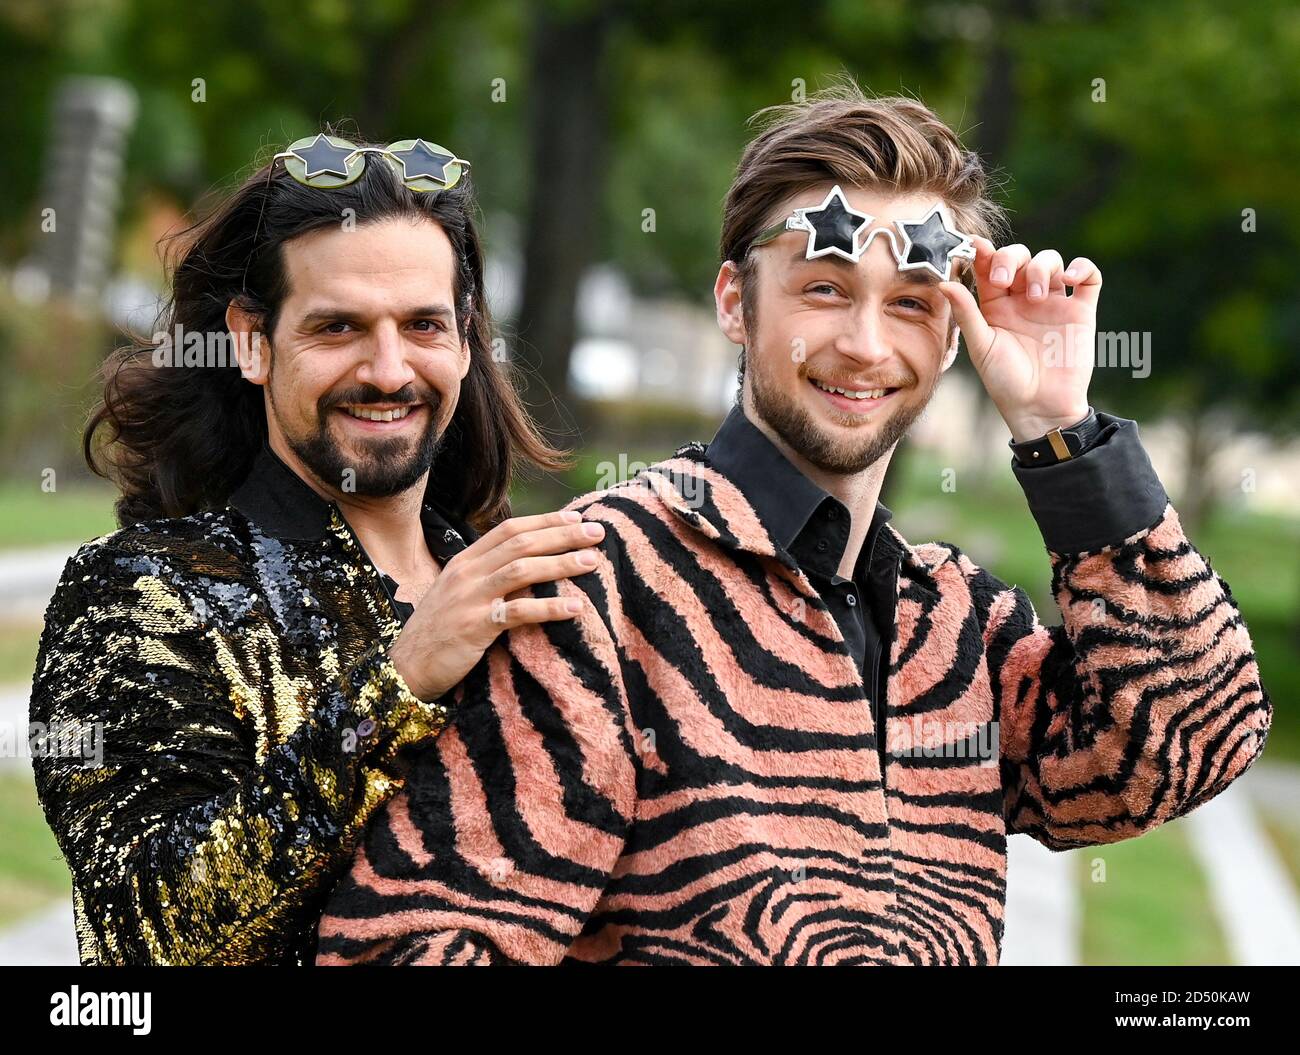 Berlin, Germany. 12th Oct, 2020. The magicians Siegfried (r) and Joy at a  press event for their new magic show "Siegfried & Joy. Let Vegas! Die  Zaubershow" in the Tipi - The